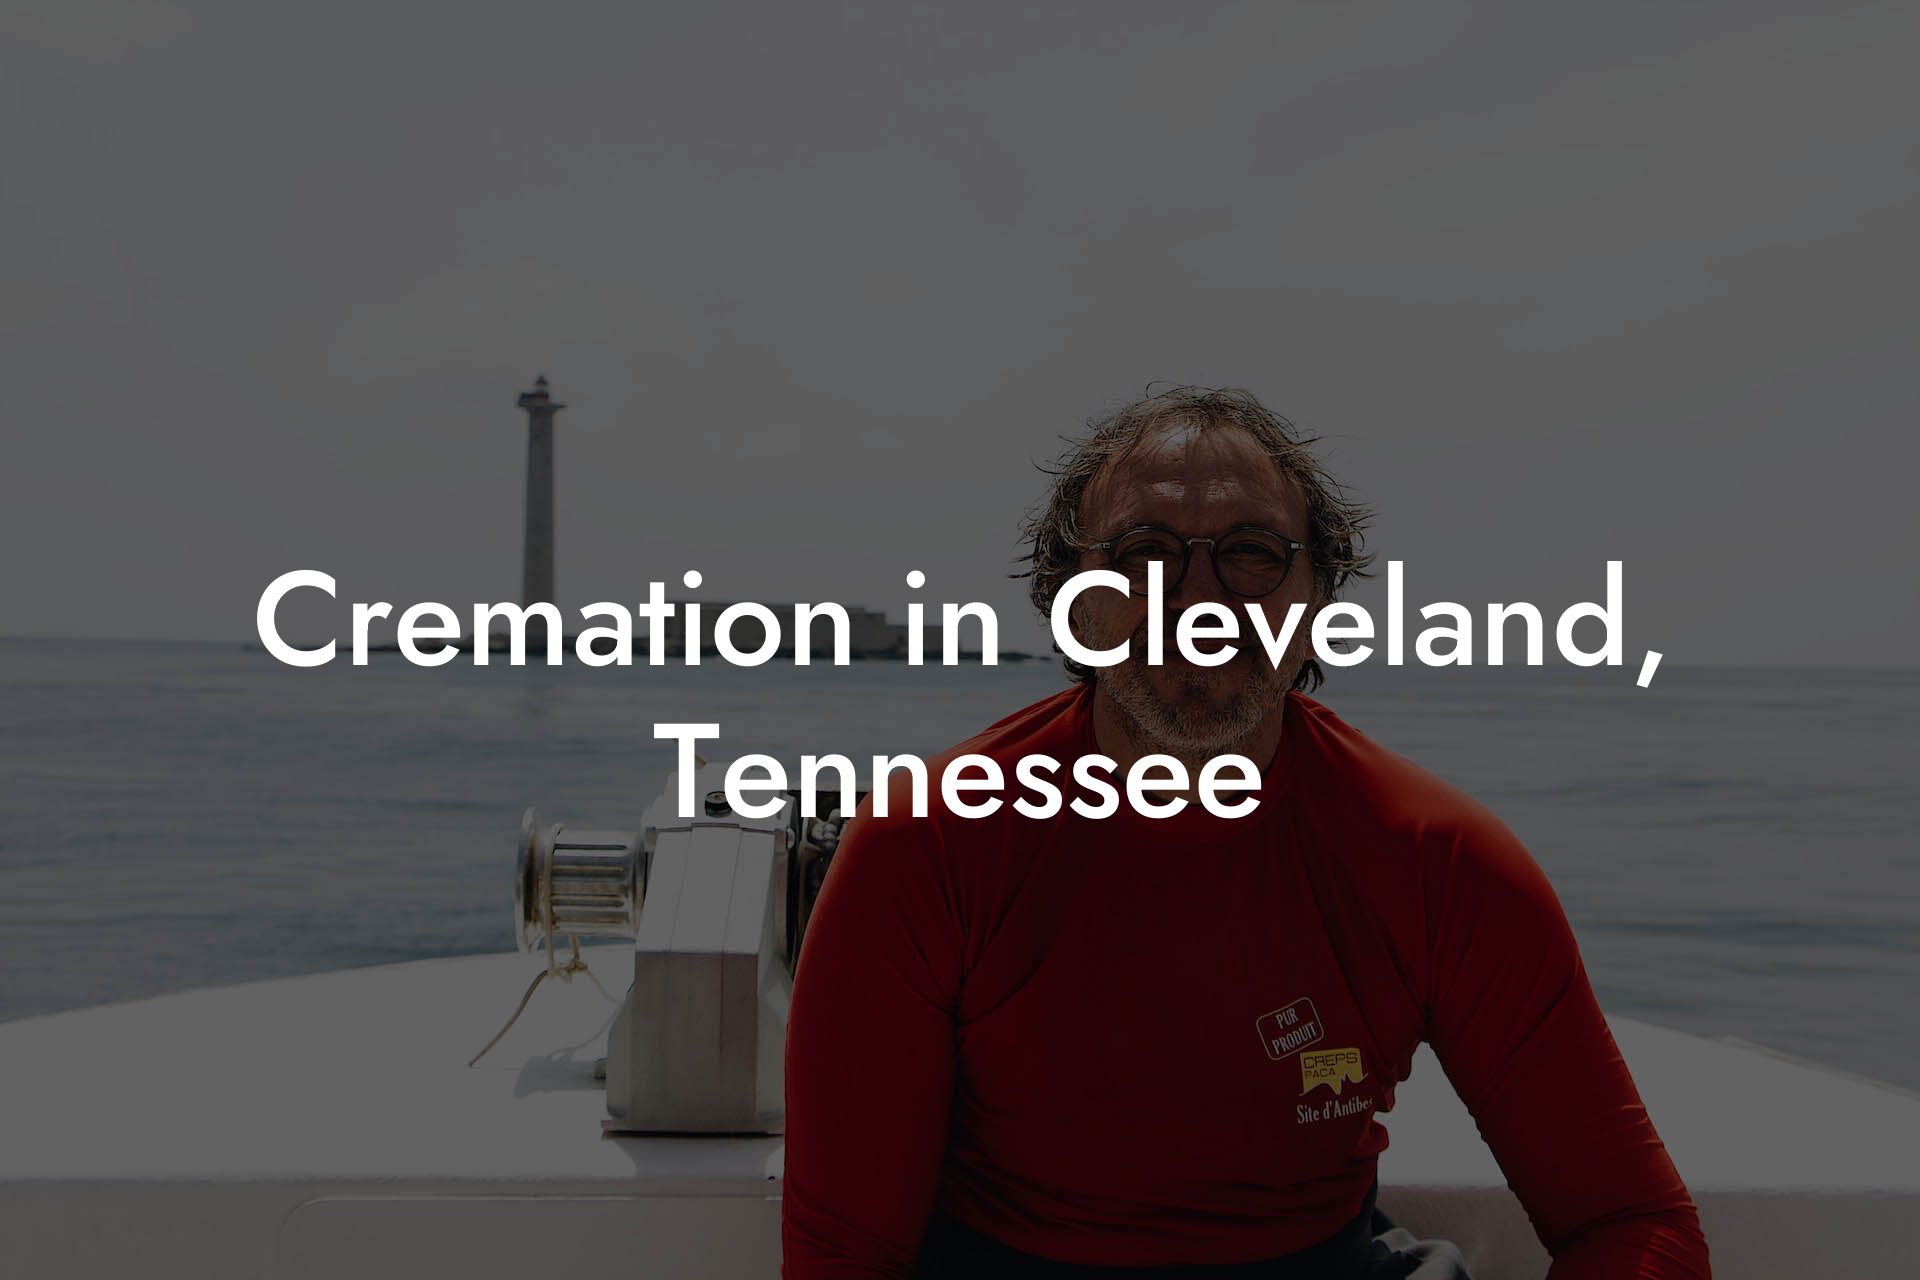 Cremation in Cleveland, Tennessee